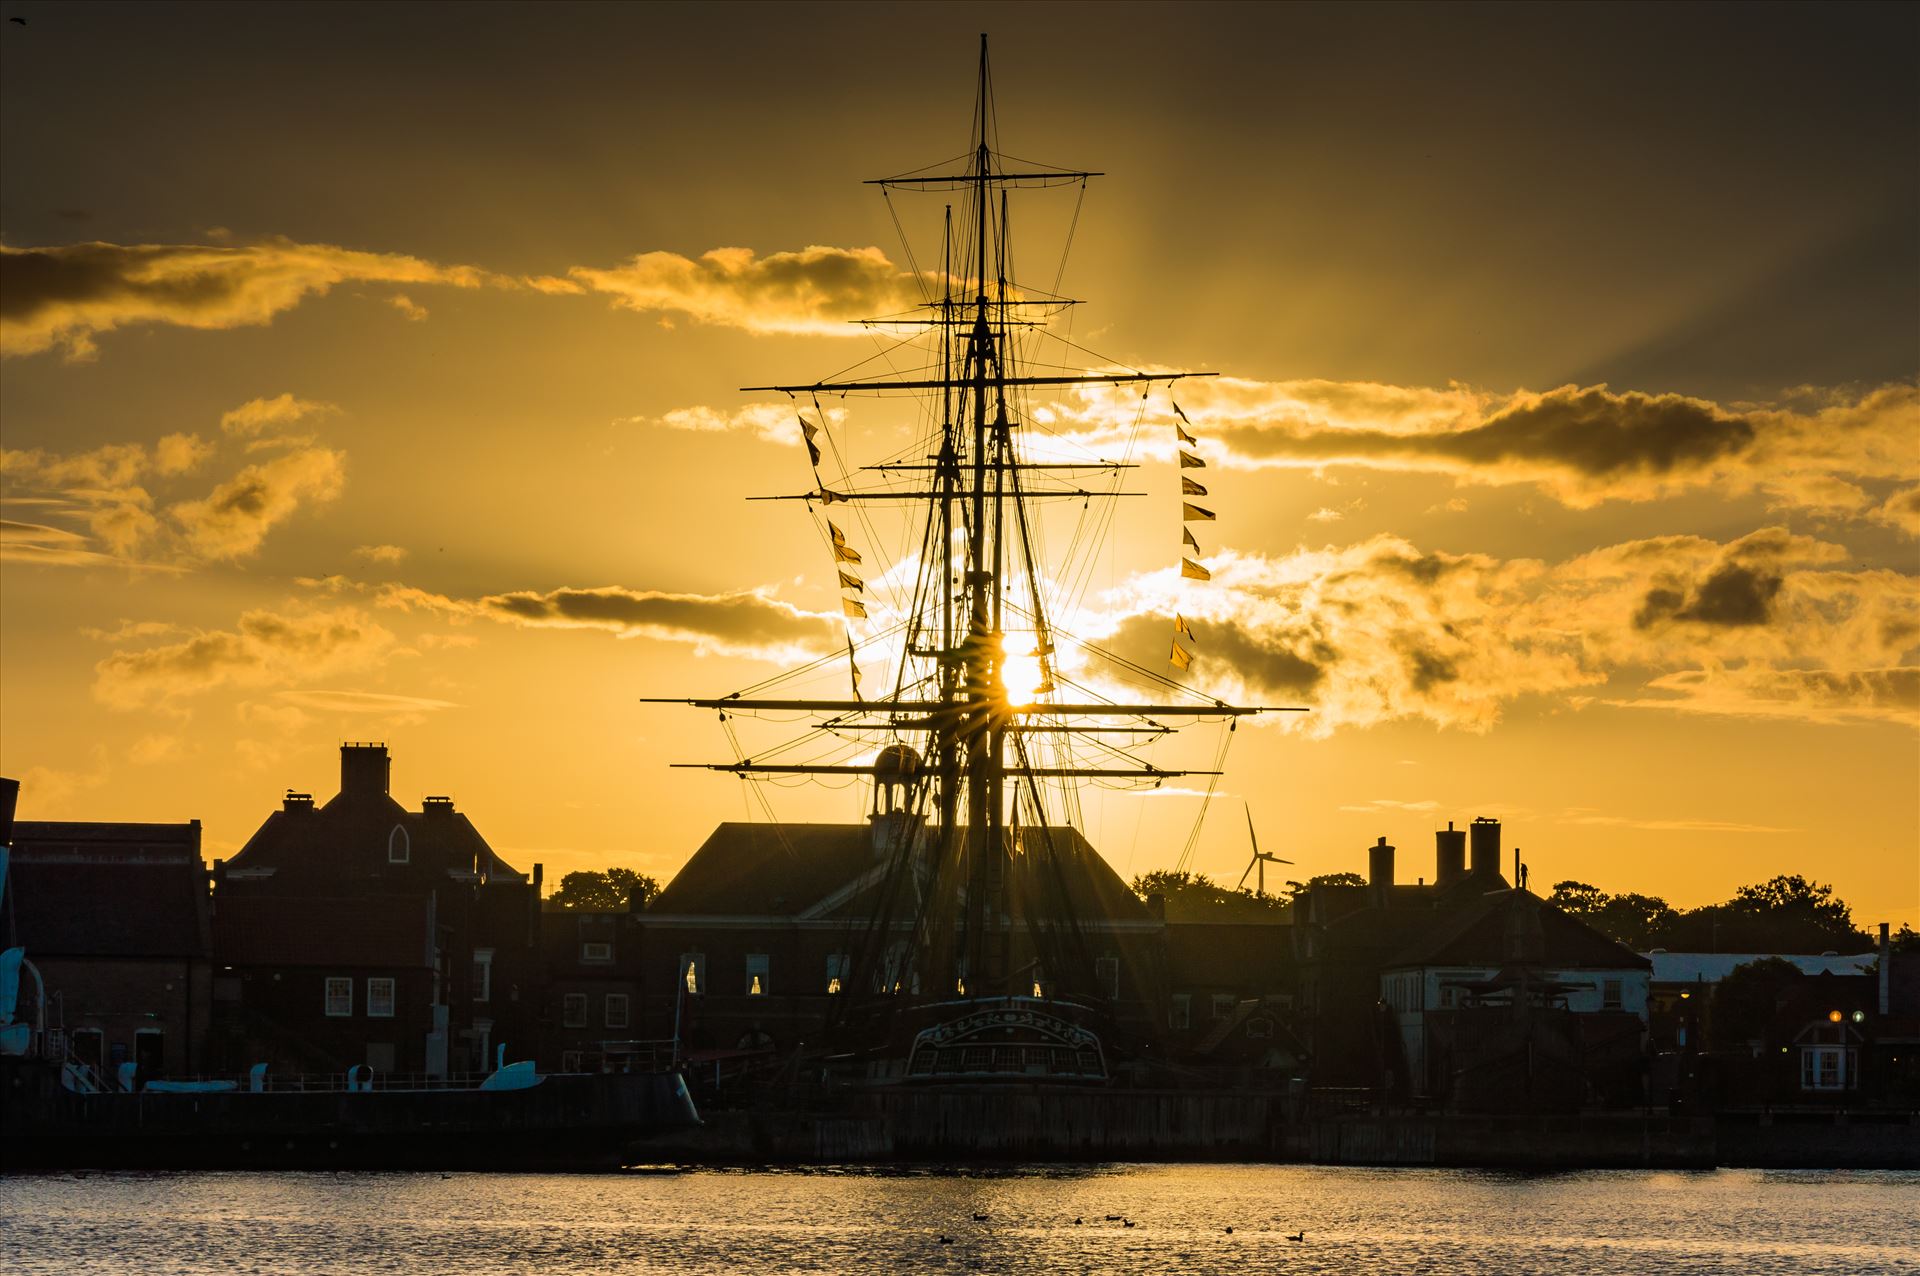 HMS Trincomalee Hartlepool Sunset - HMS Trincomalee at sunset in the lovely seaside town of Hartlepool. by AJ Stoves Photography